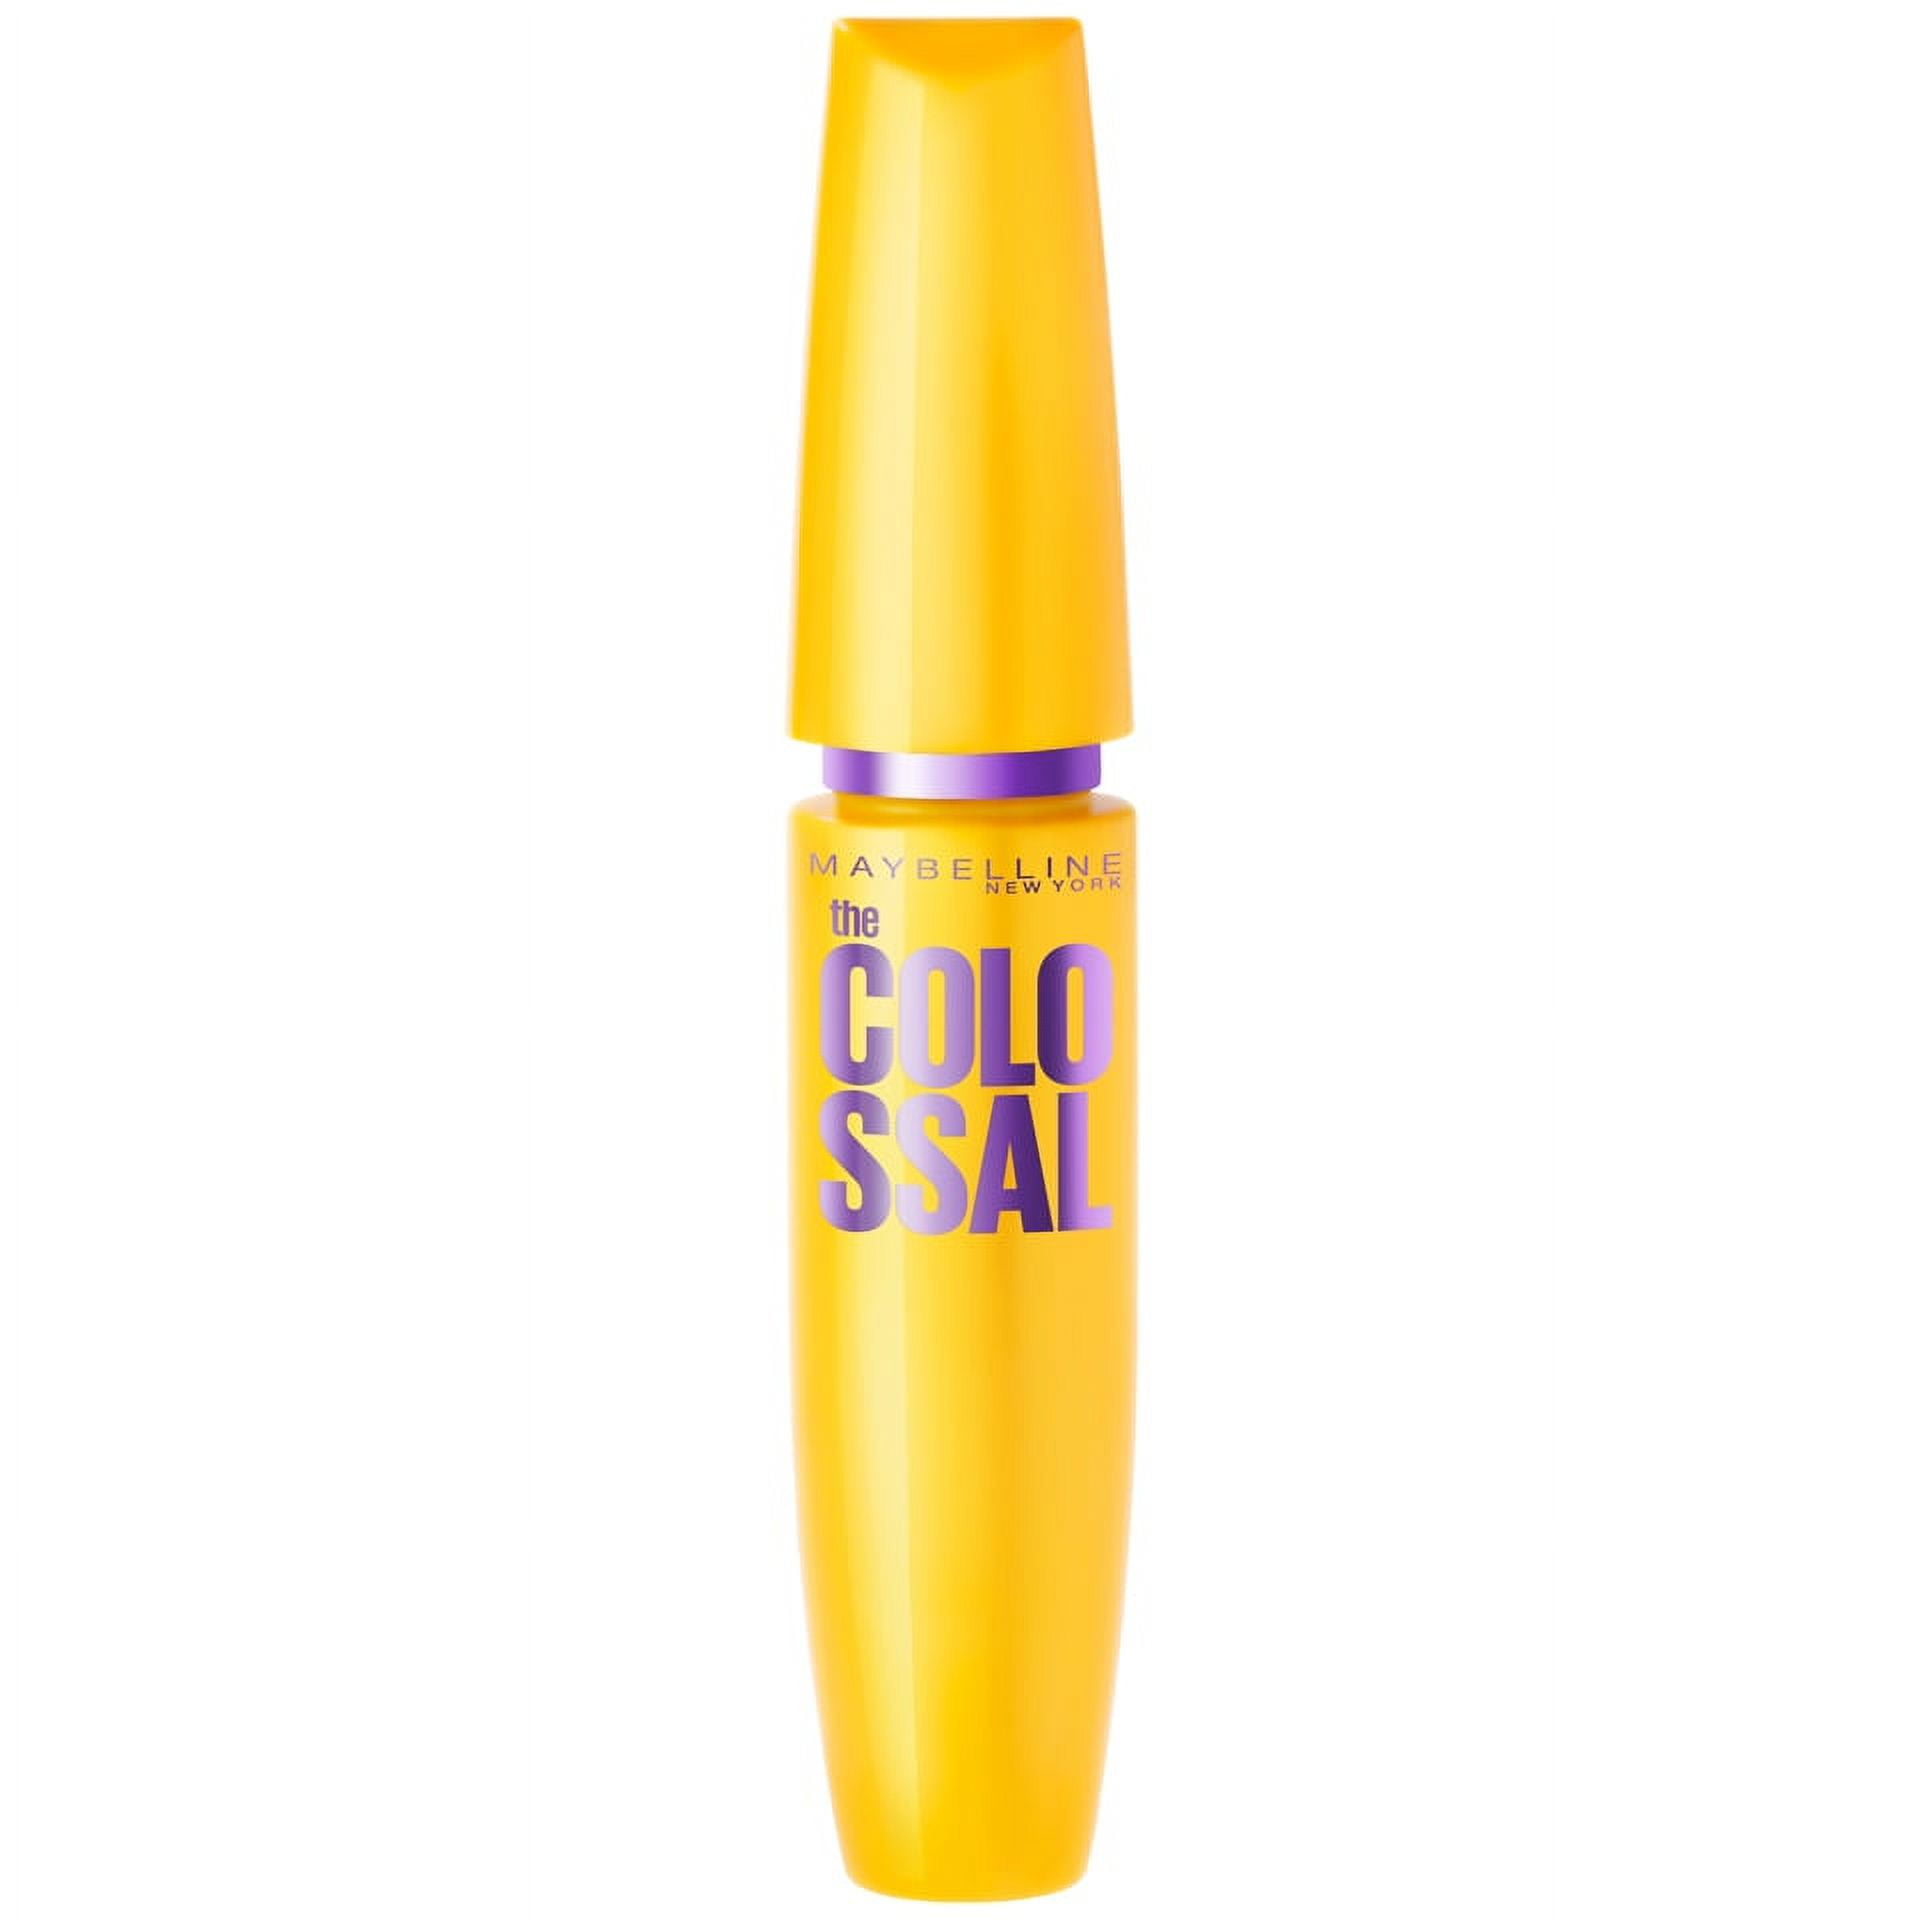 Express Black Colossal Maybelline Mascara, The Volum Classic